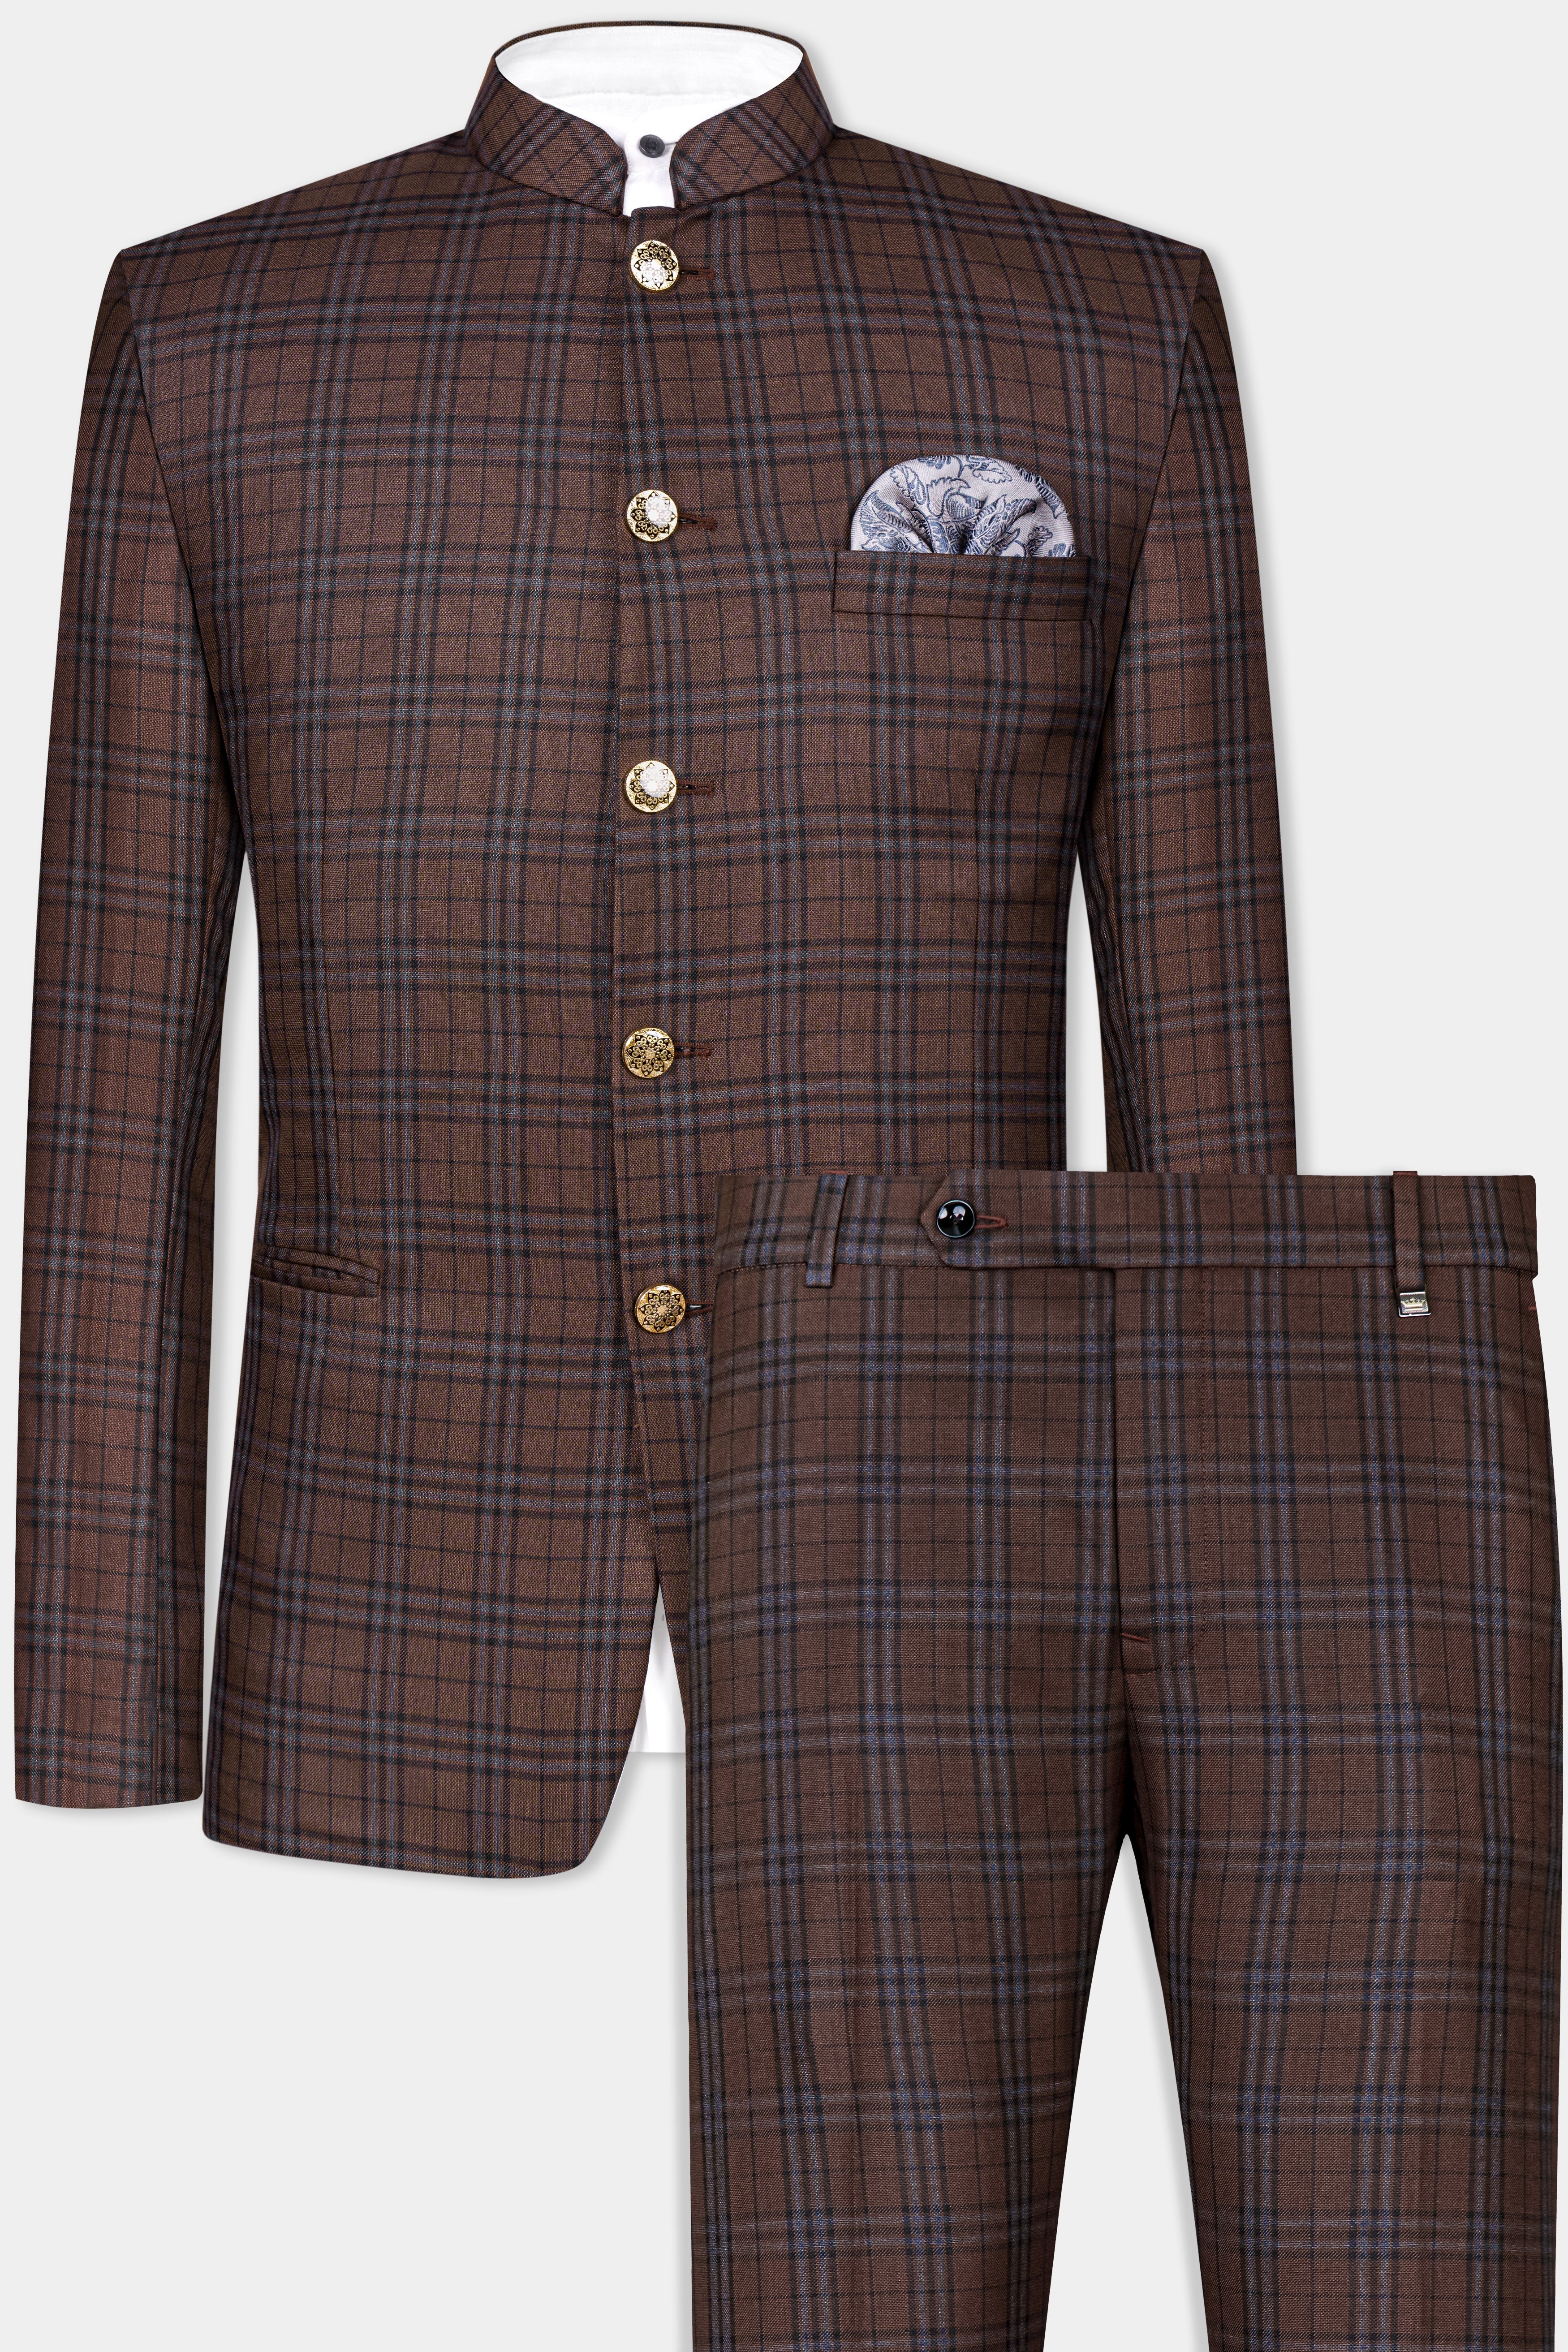 Gingerbread Brown and Haiti Blue Plaid Wool Rich Bandhgala Suit